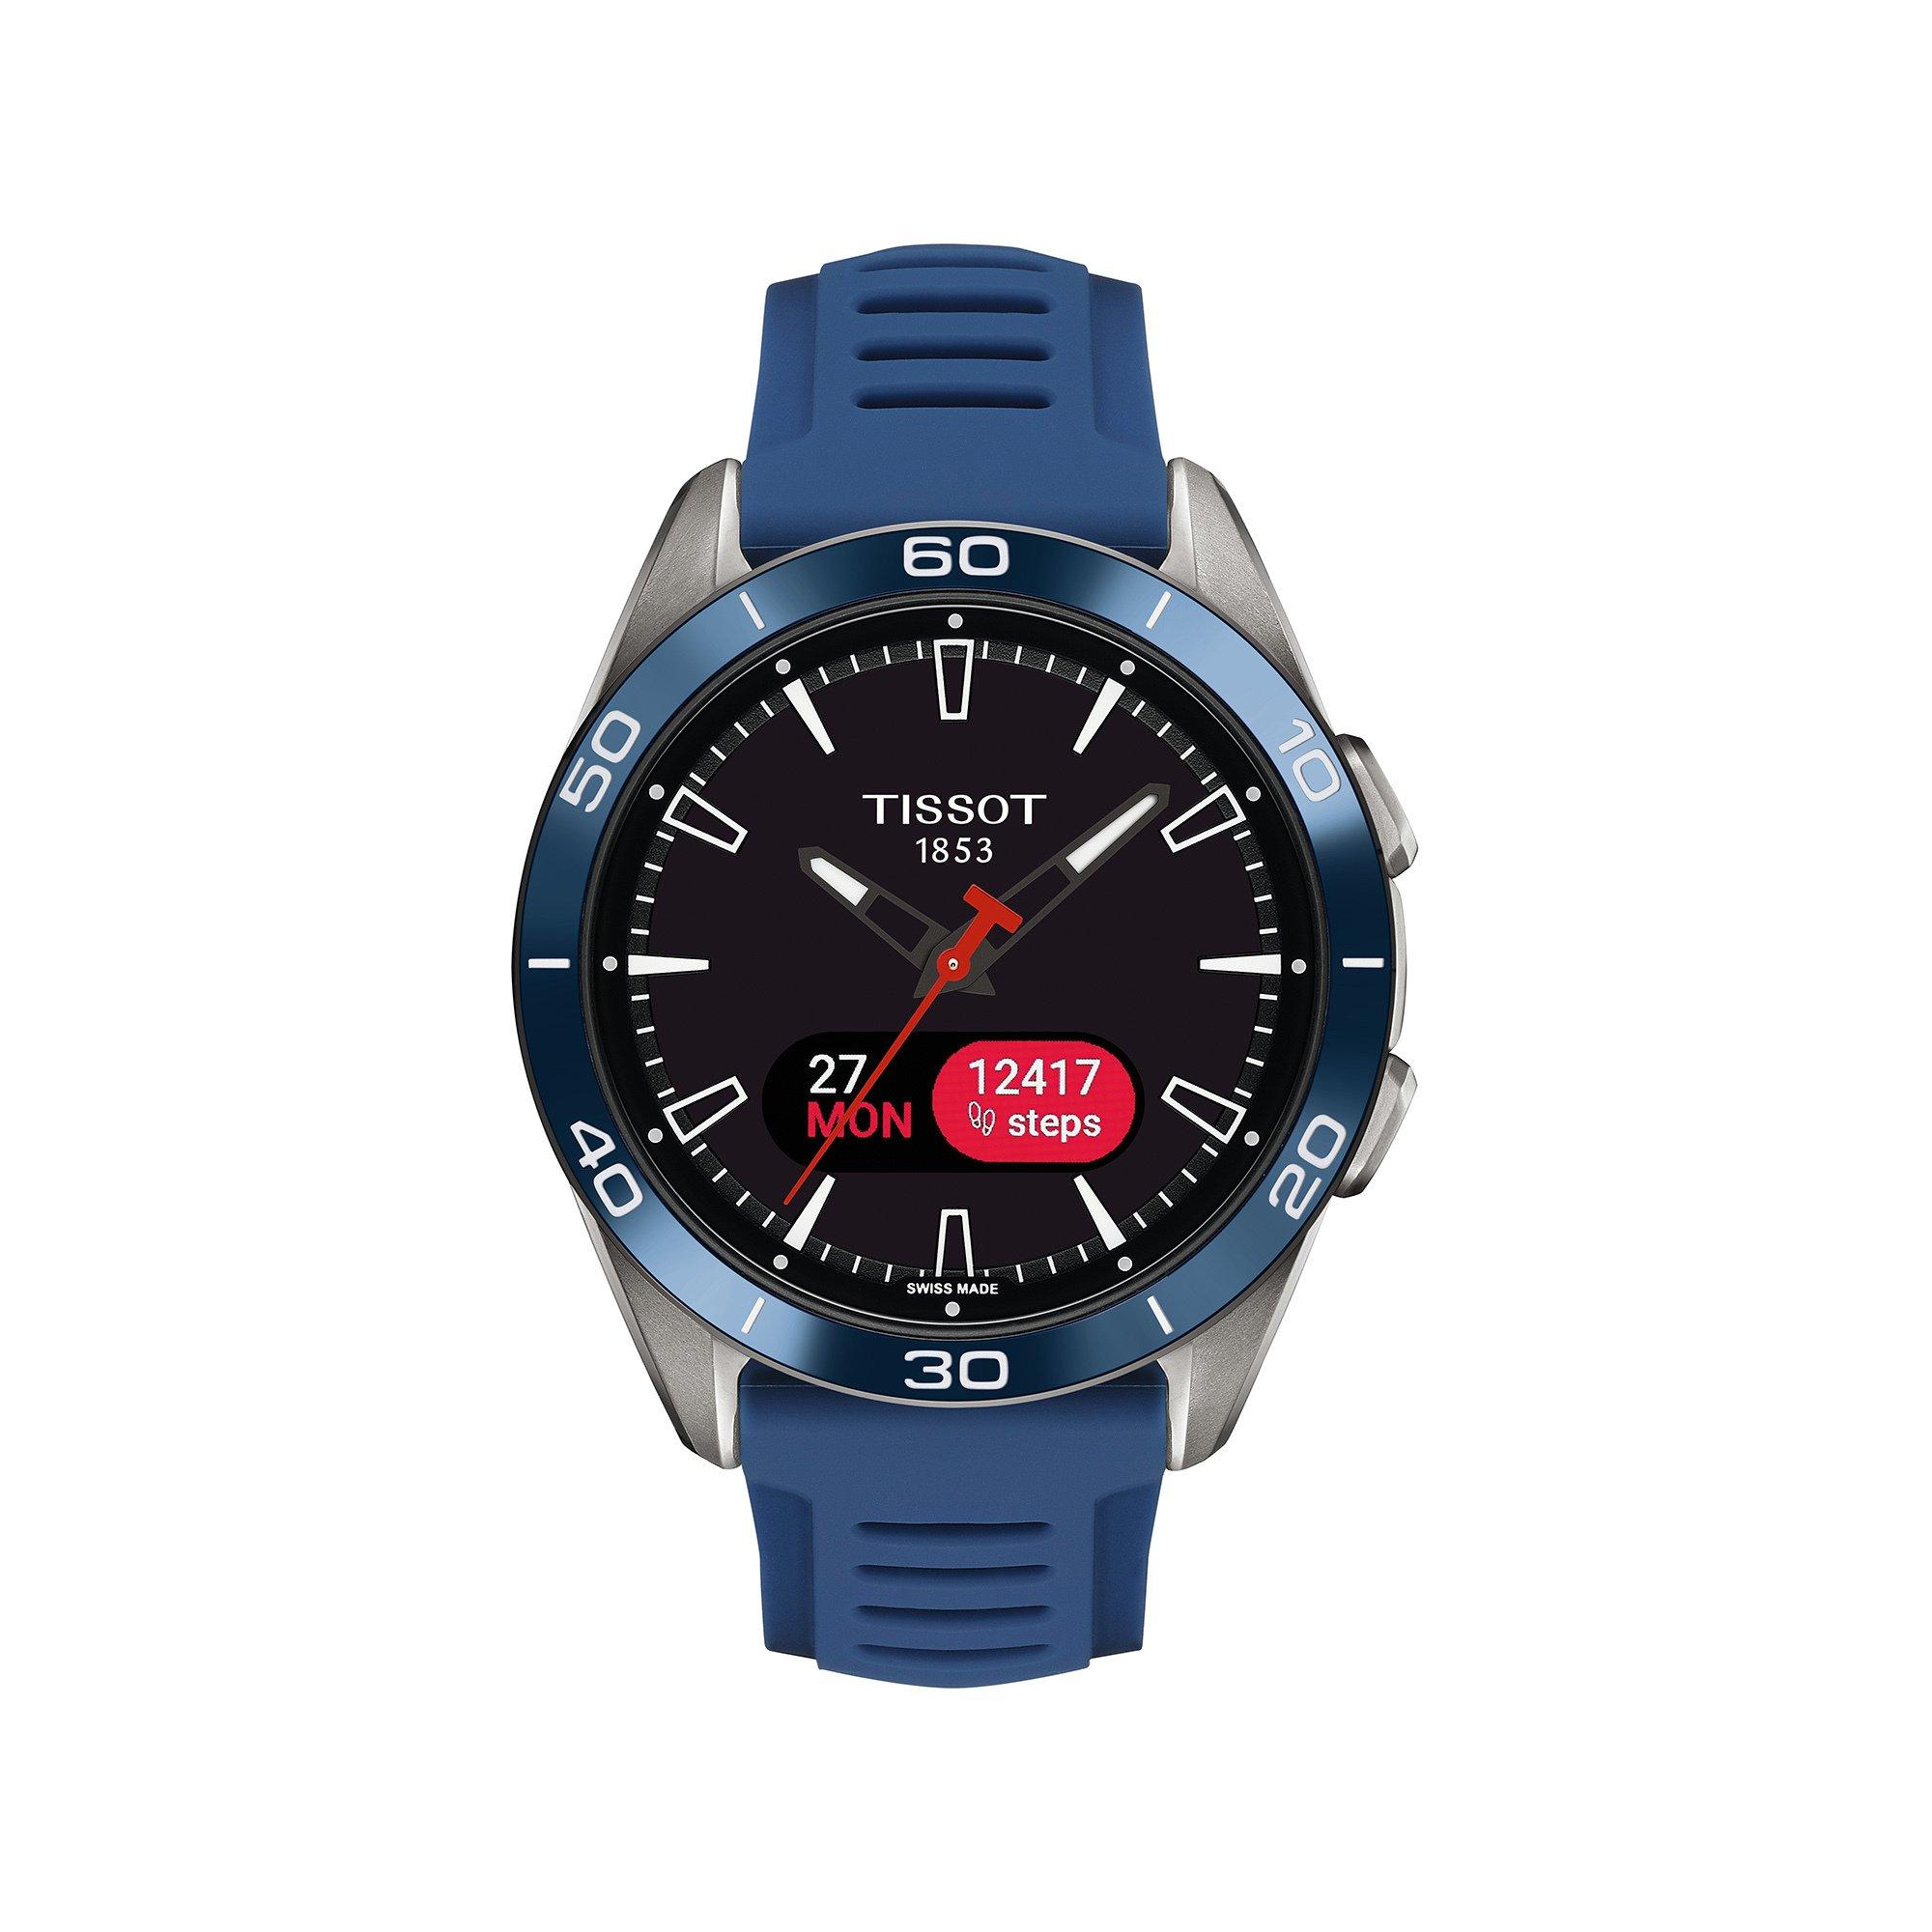 TISSOT T-Touch Sport Connect Smartwatch Display 